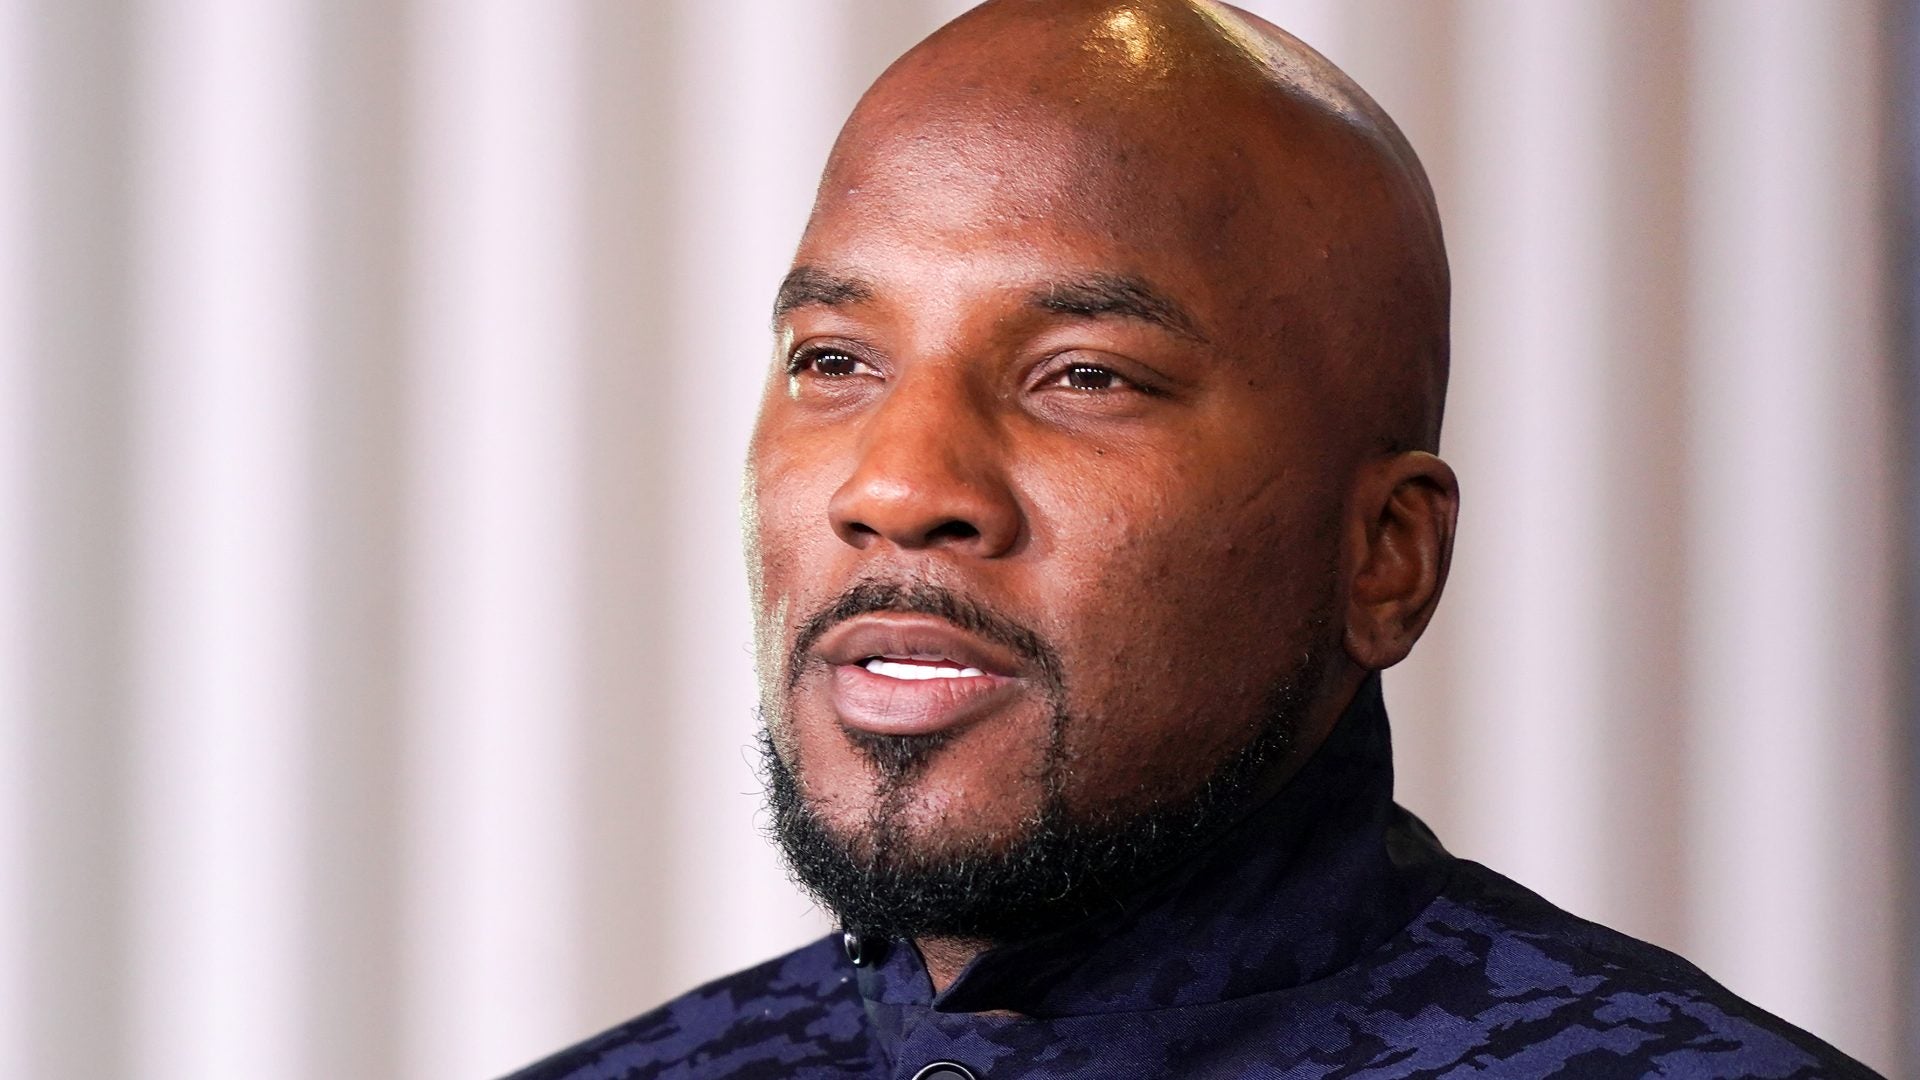 Jeezy On Voting: 'It's Time To Step Up'